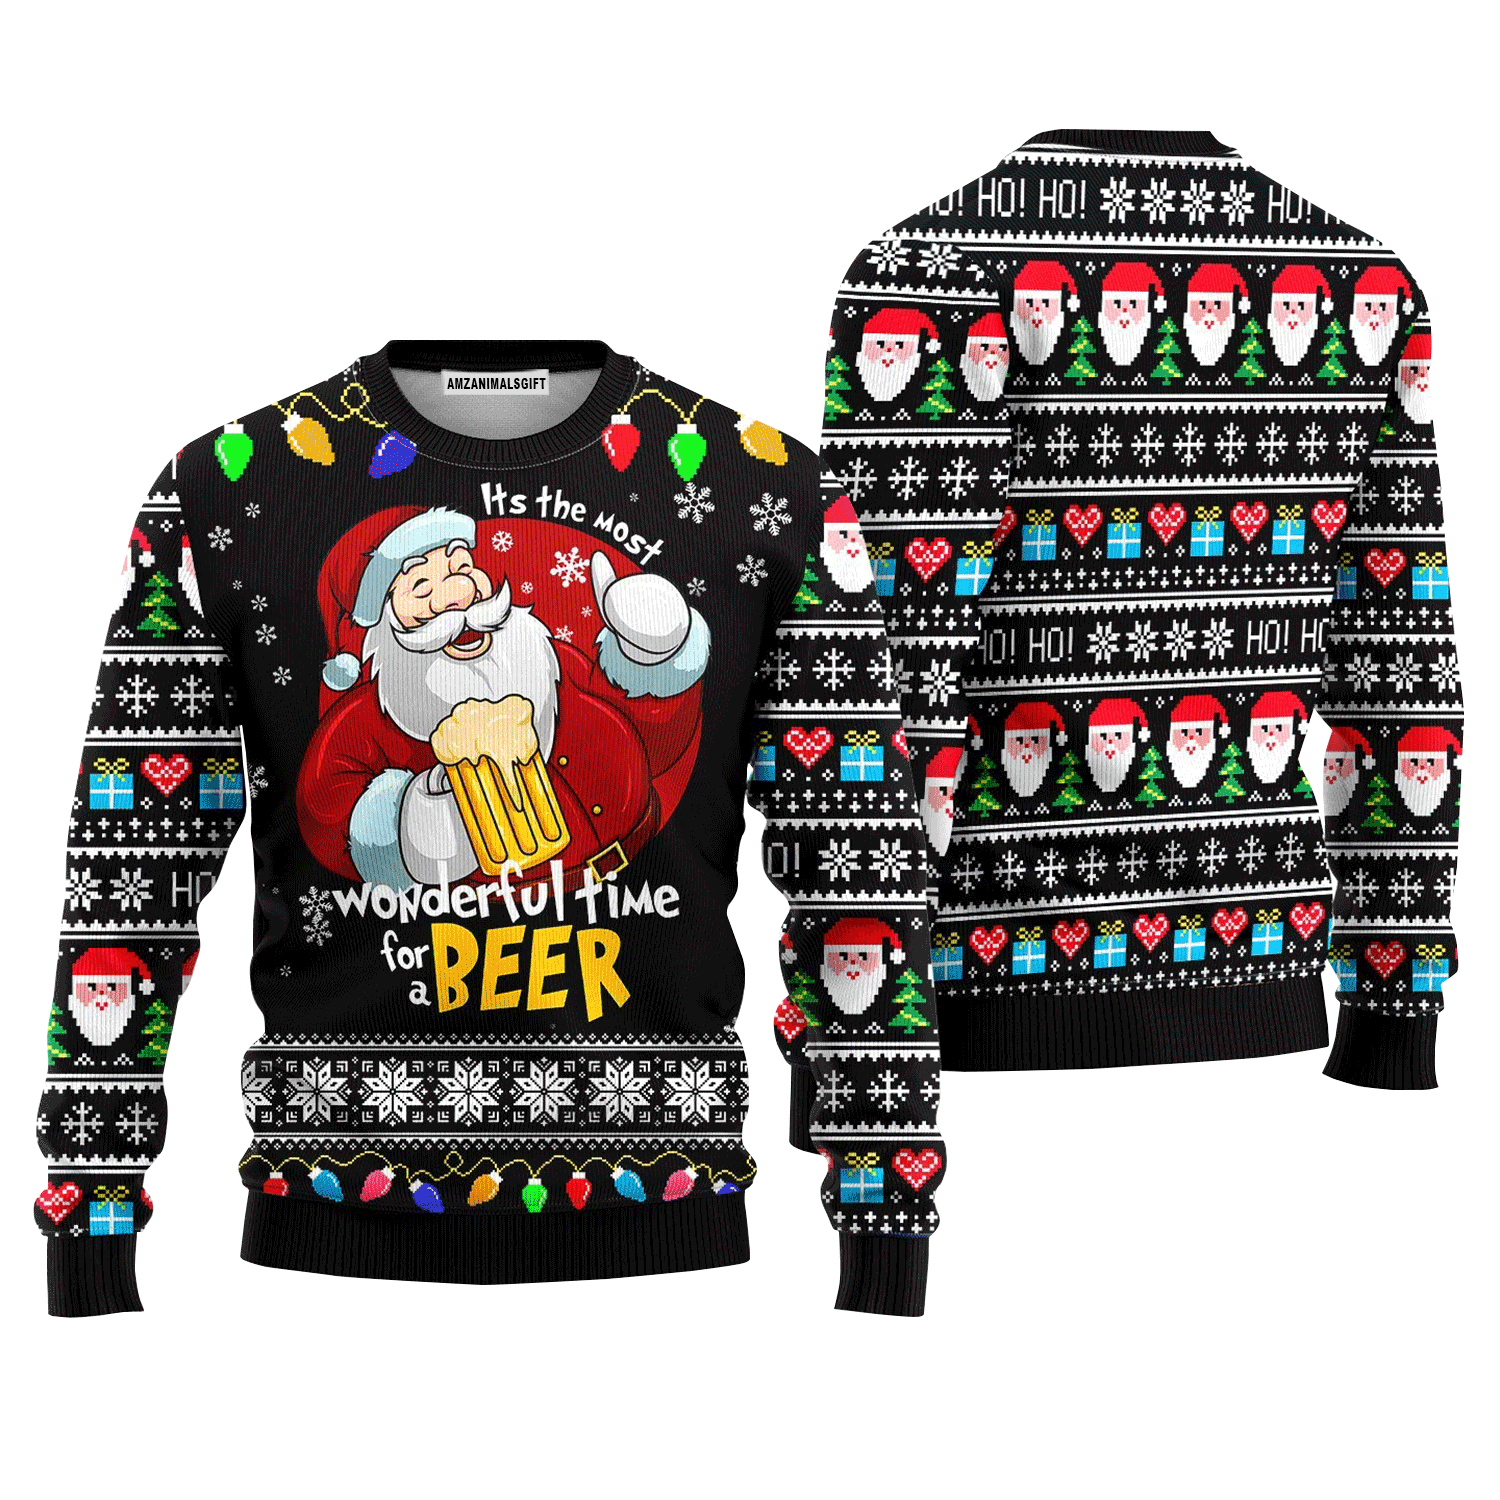 Santa Drink Beer Sweater Wonderful Time For A Beer, Ugly Sweater For Men & Women, Perfect Outfit For Christmas New Year Autumn Winter